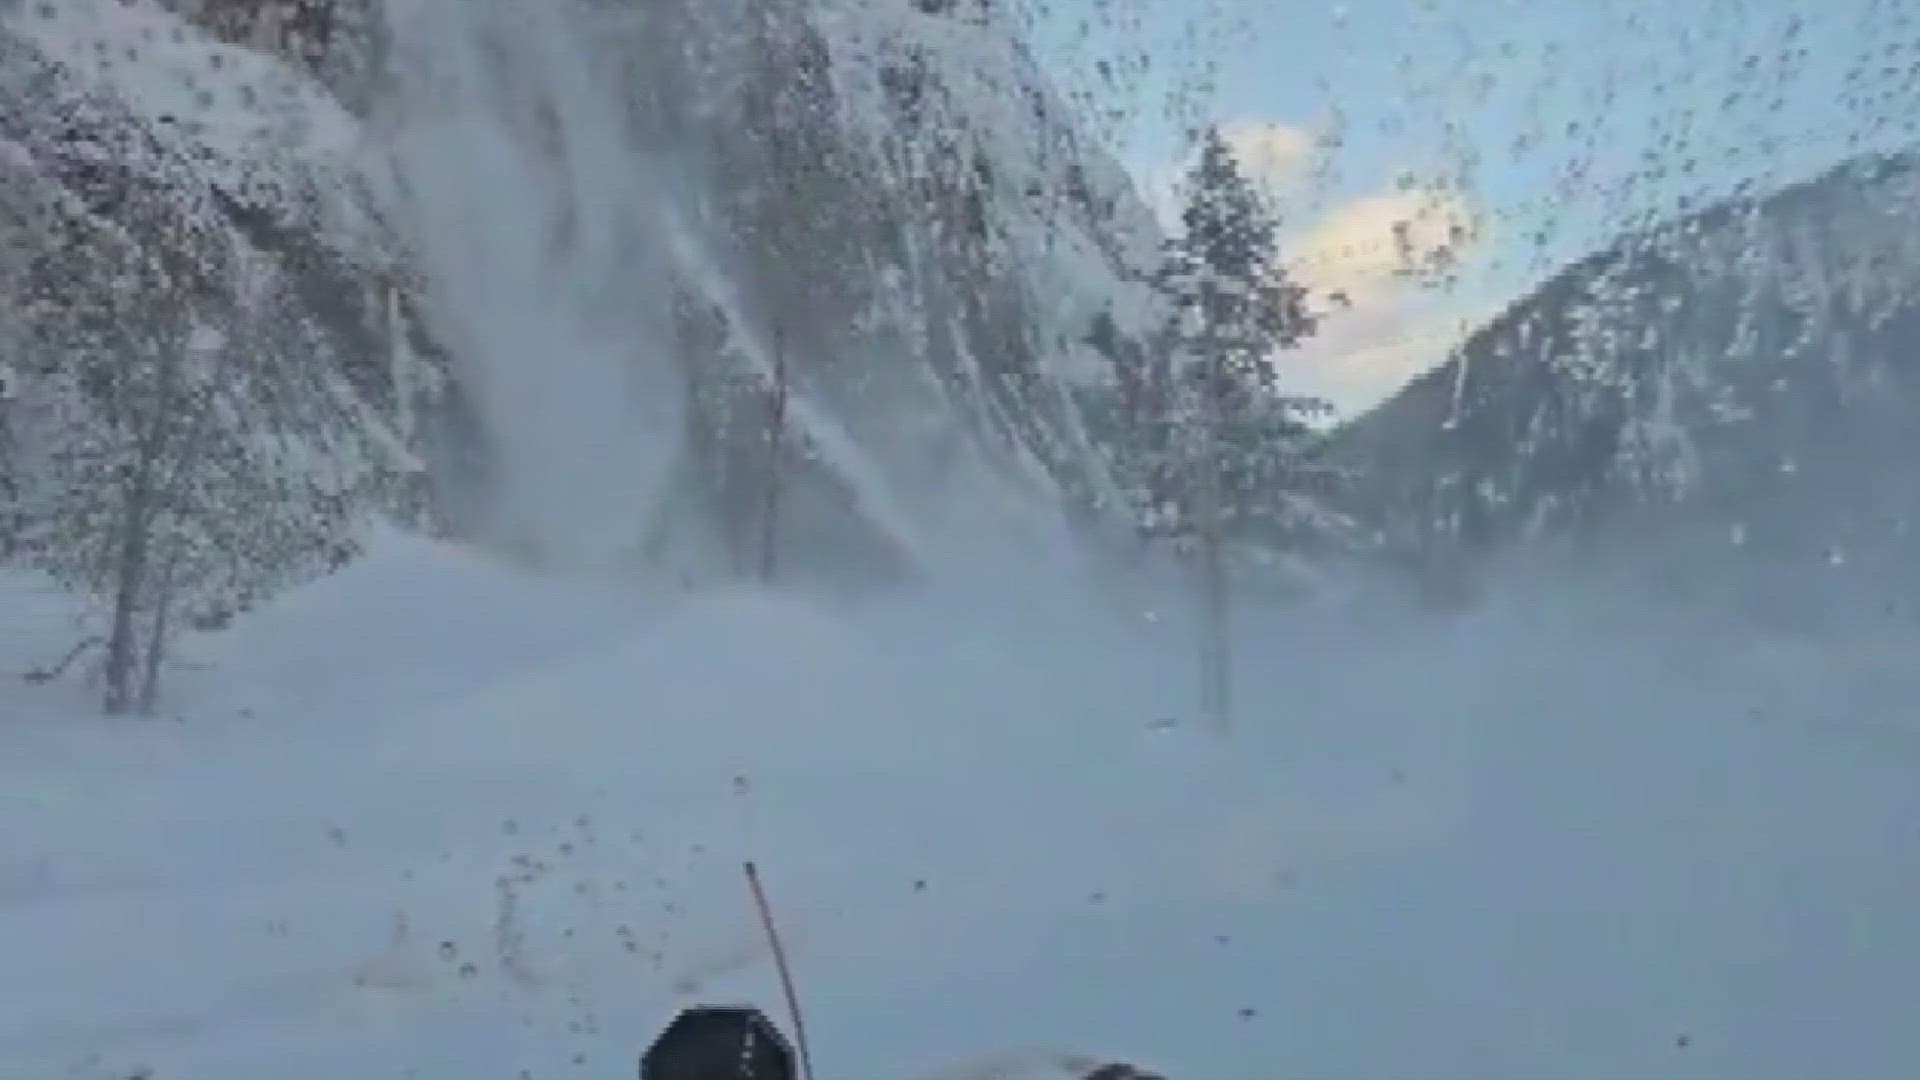 White Pass is closed after it got approximately 10" of snow within the last 24 hours and has recorded 100 mph winds